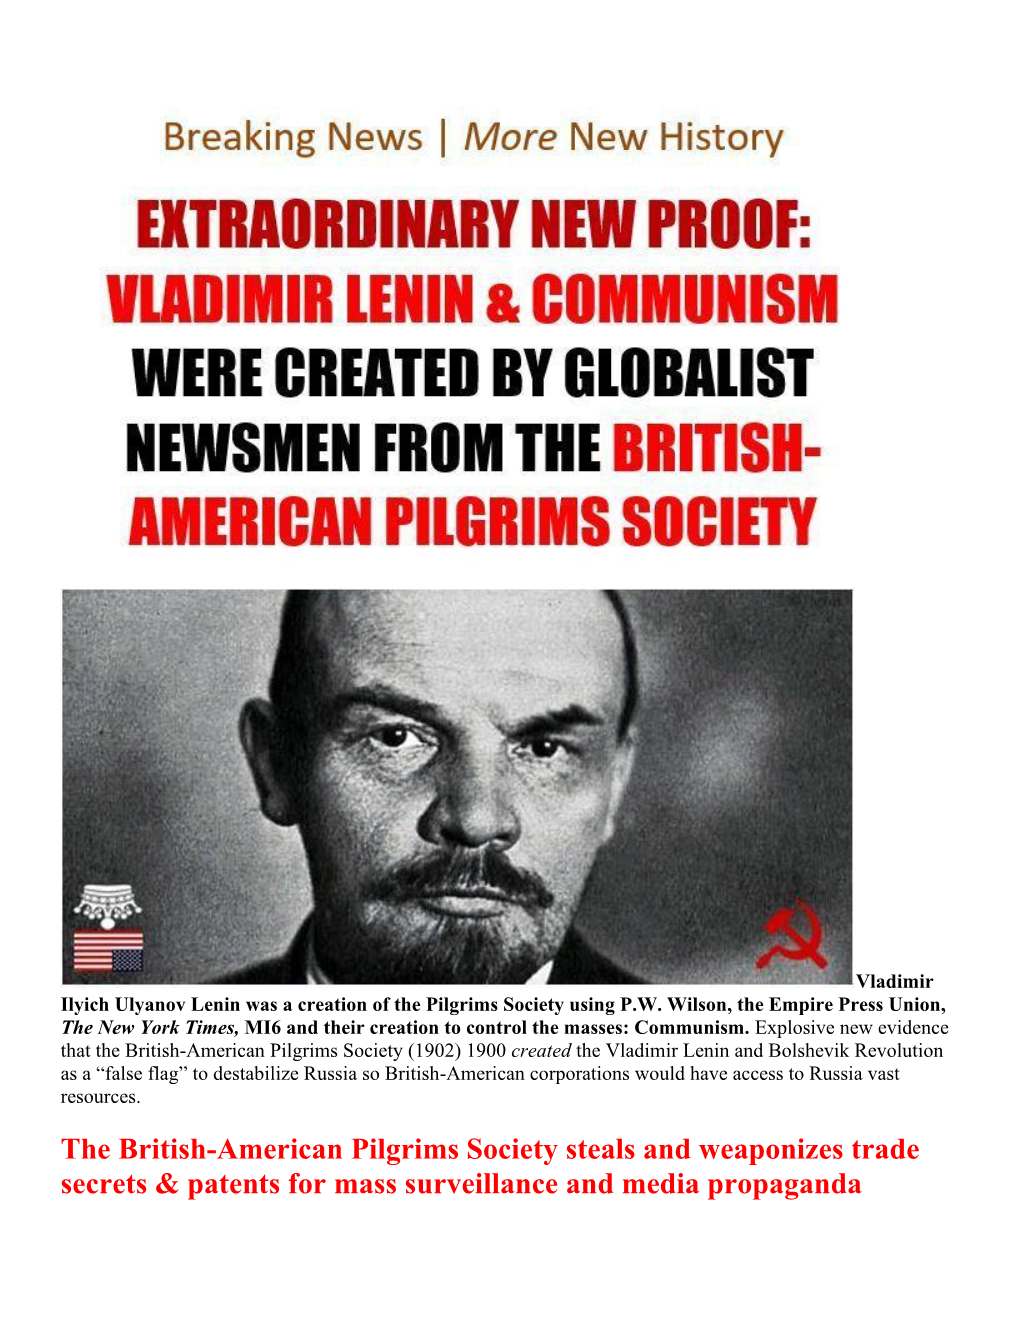 Lenin Was a Creation of the Pilgrims Society Using P.W